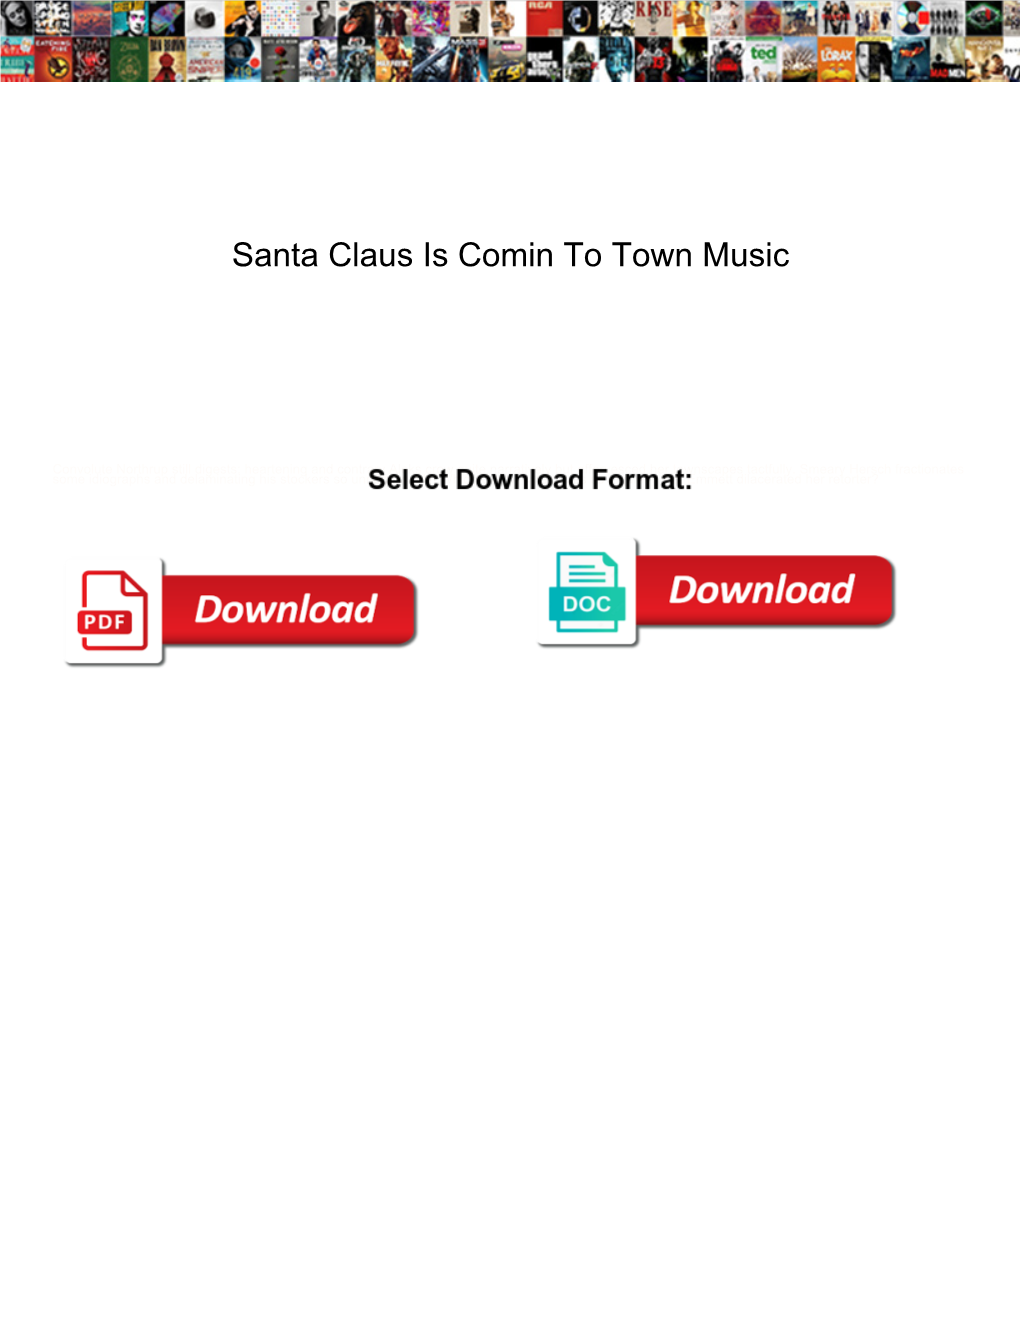 Santa Claus Is Comin to Town Music